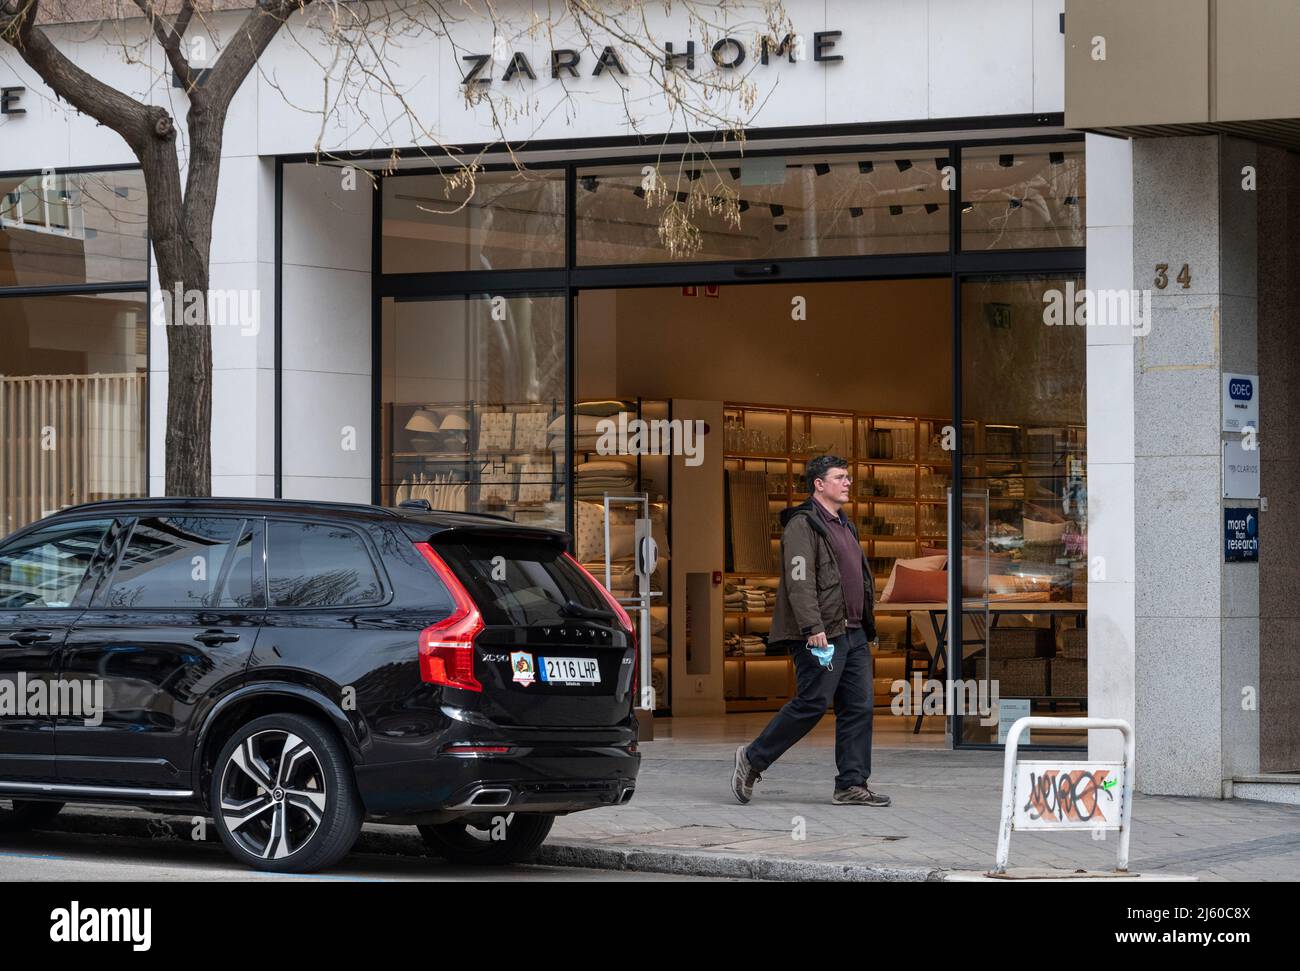 Zara home shop hi-res stock photography and images - Page 2 - Alamy